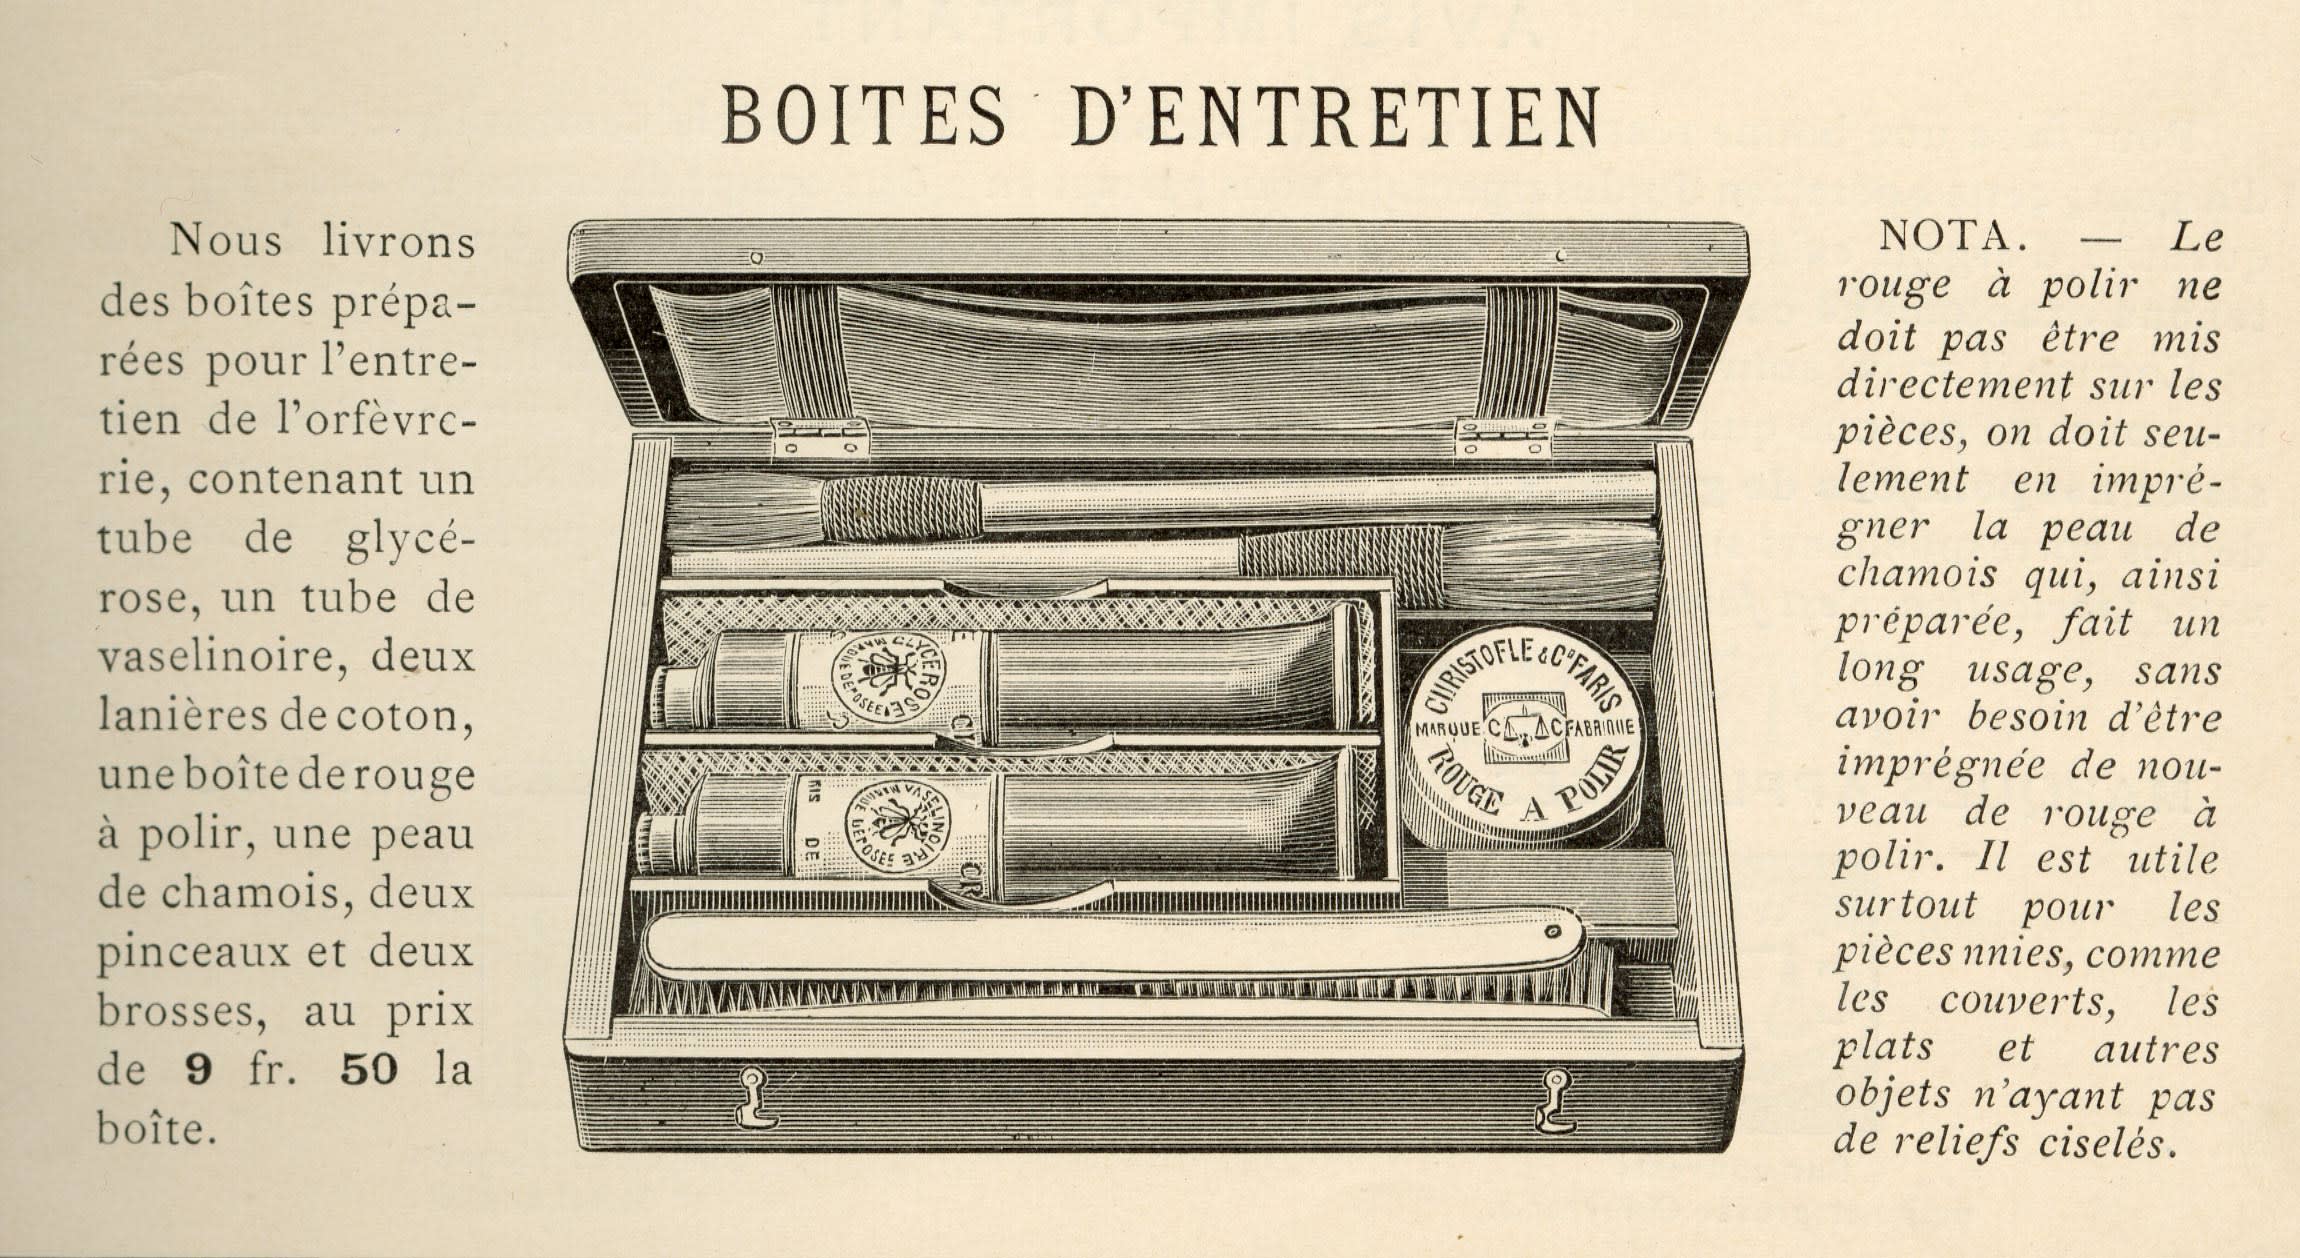 Extract from the Christofle catalog of 1898